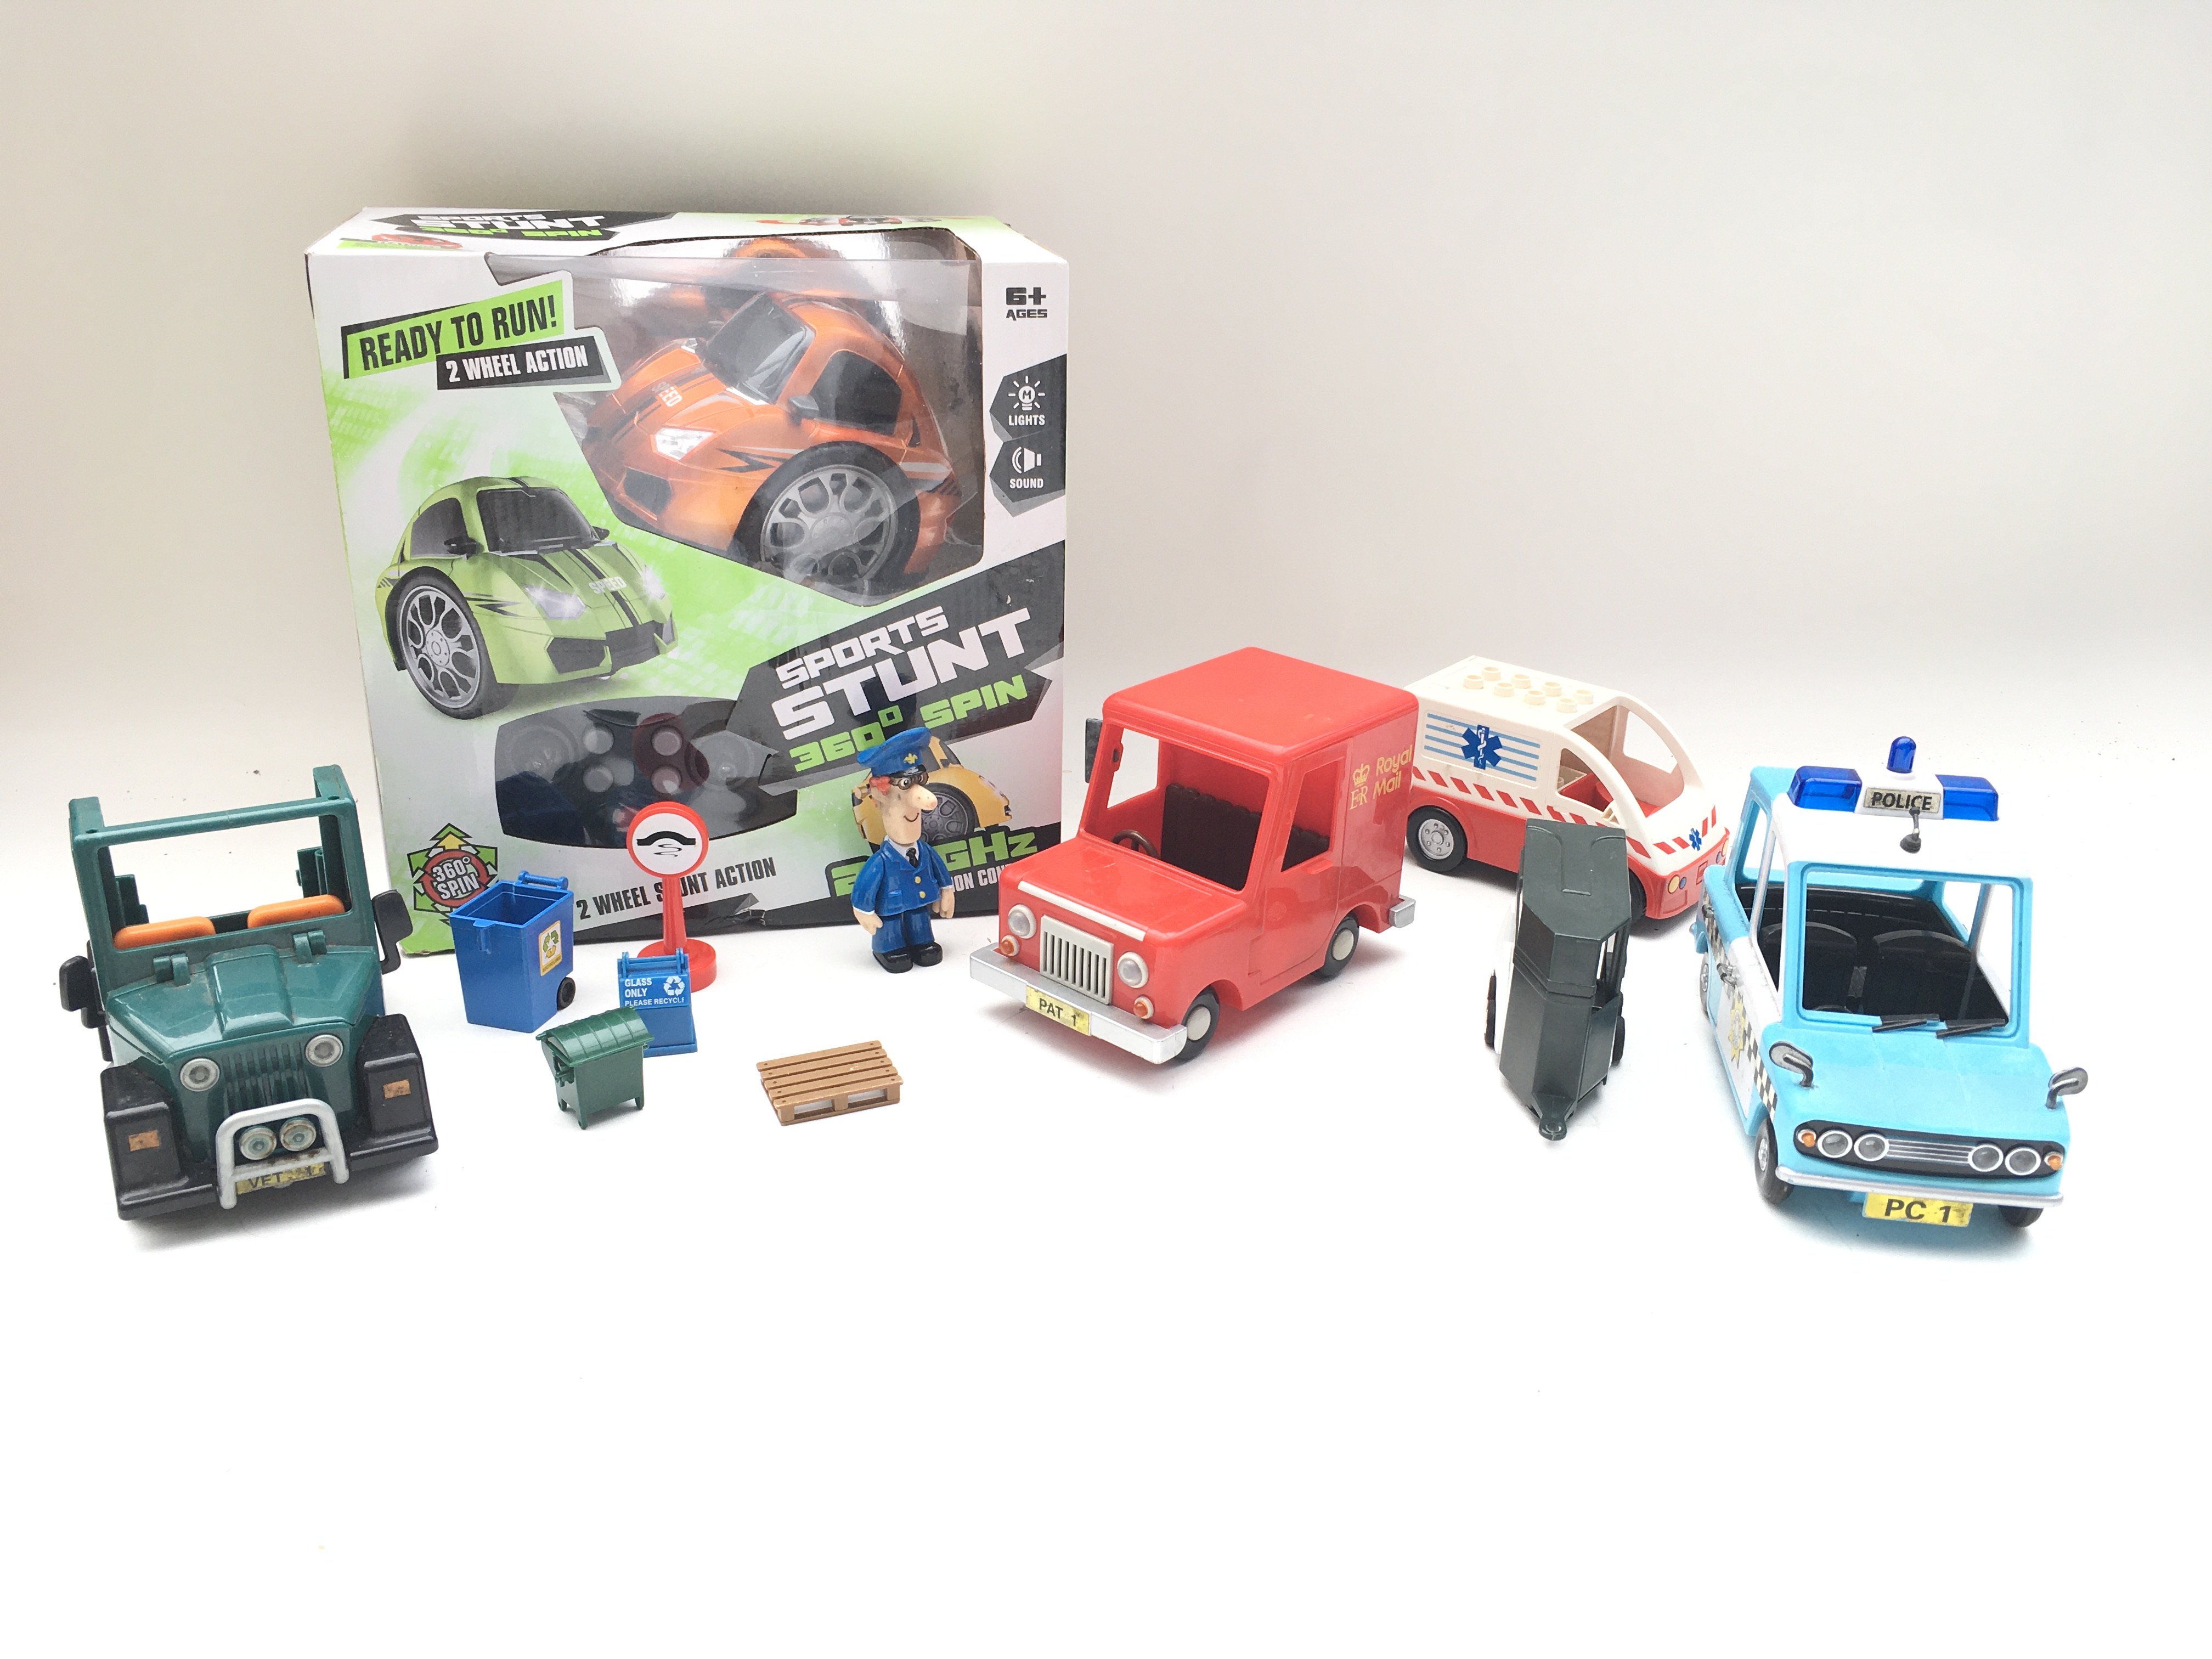 Collection of postman pat vehicles and figures. Boxed RC stunt car.